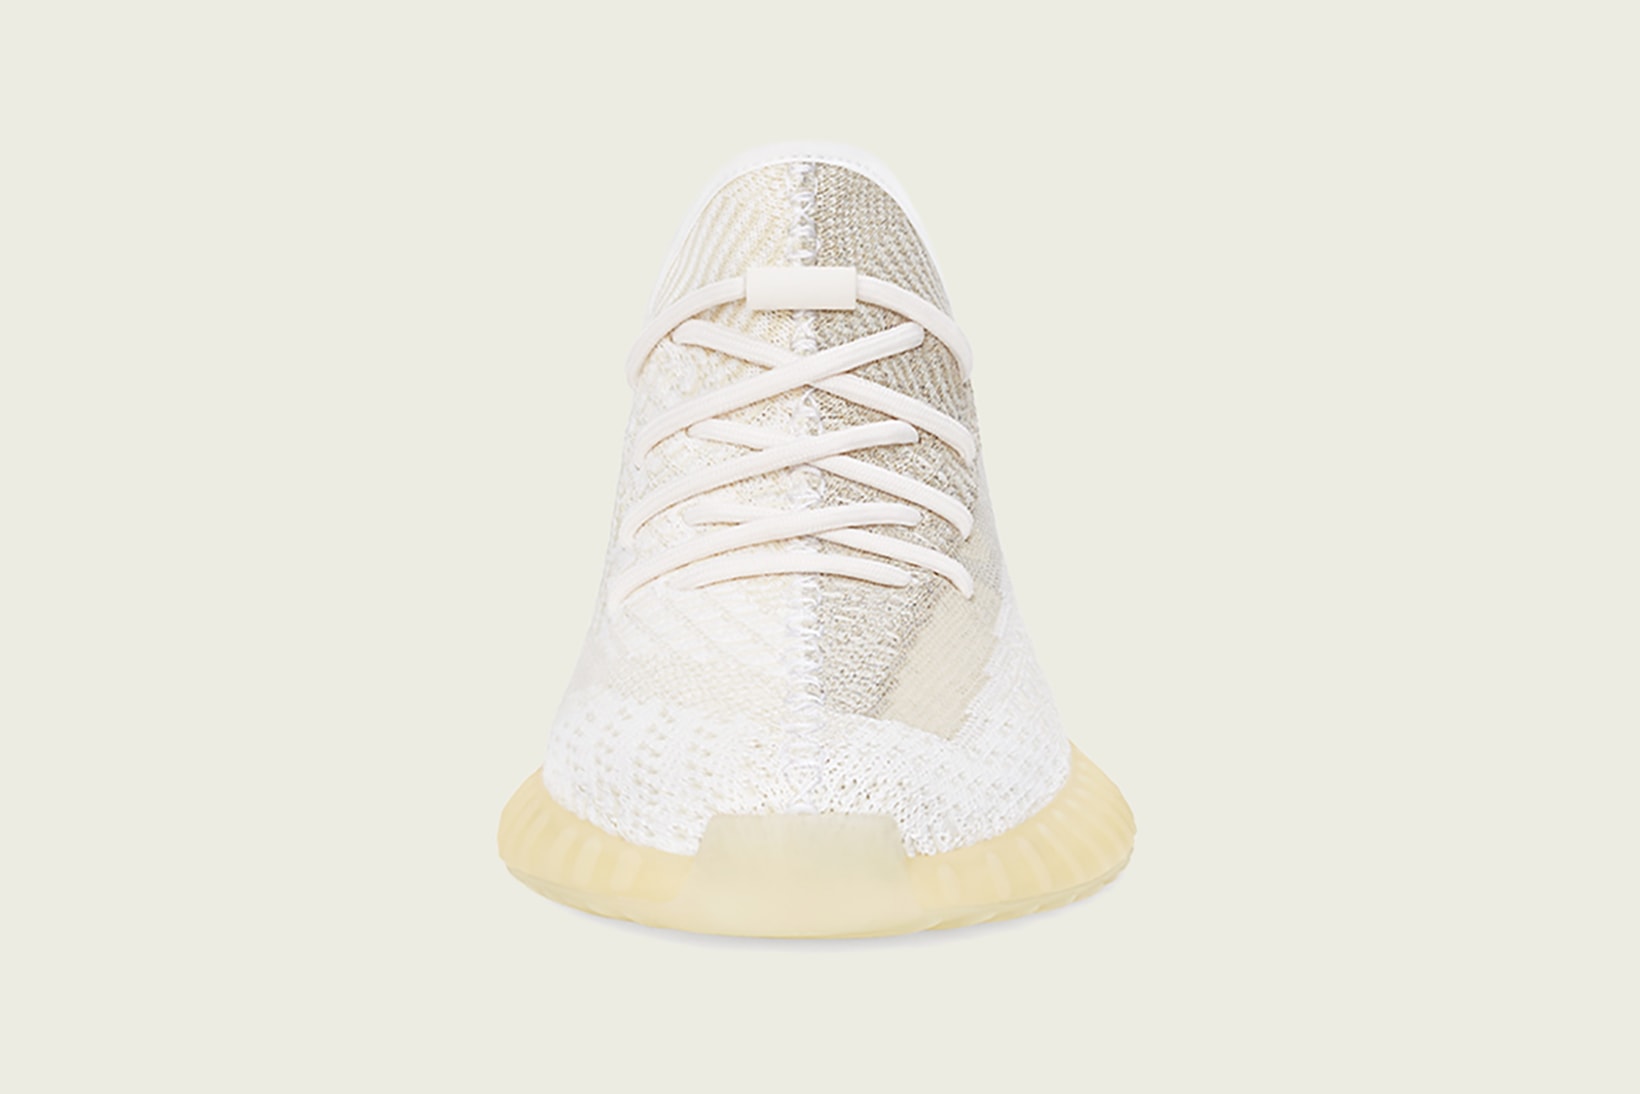 adidas kanye west yeezy boost 350 v2 natural colorway sneakerhead shoes footwear cream white